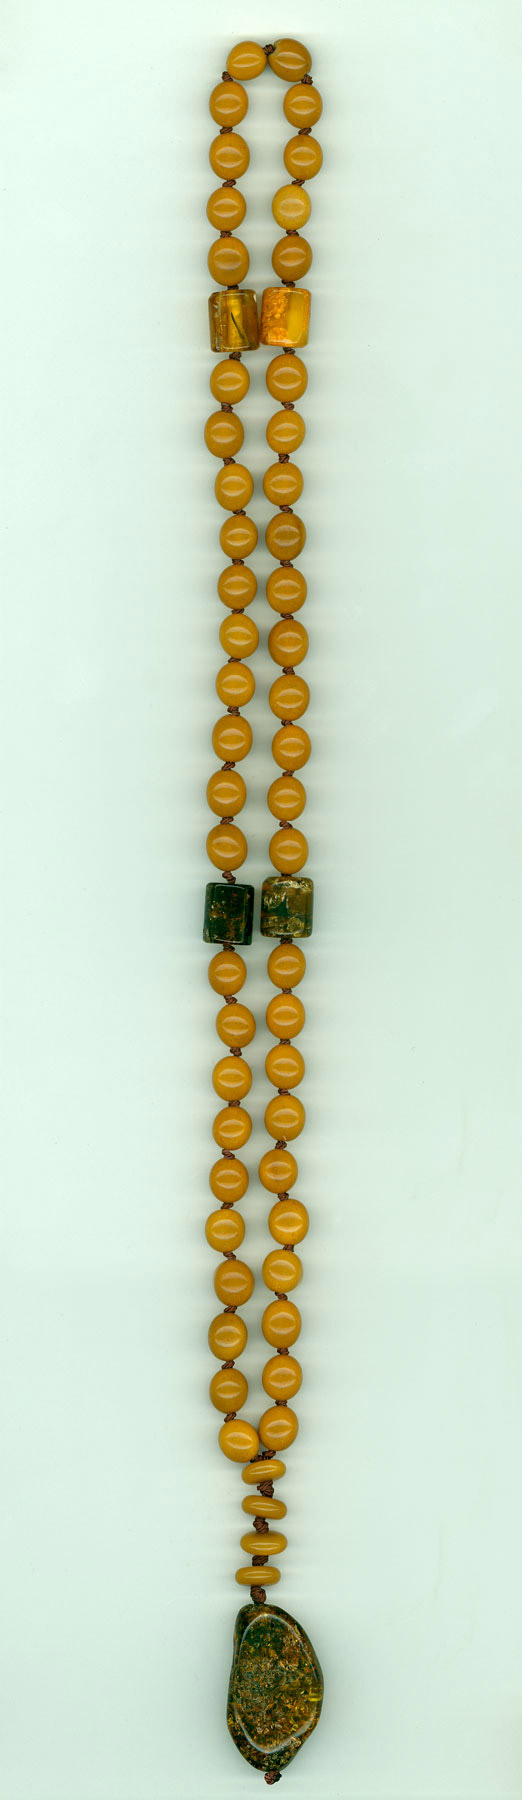 Catholic prayer object-Rosary-made of genuine amber from Baltic sea.